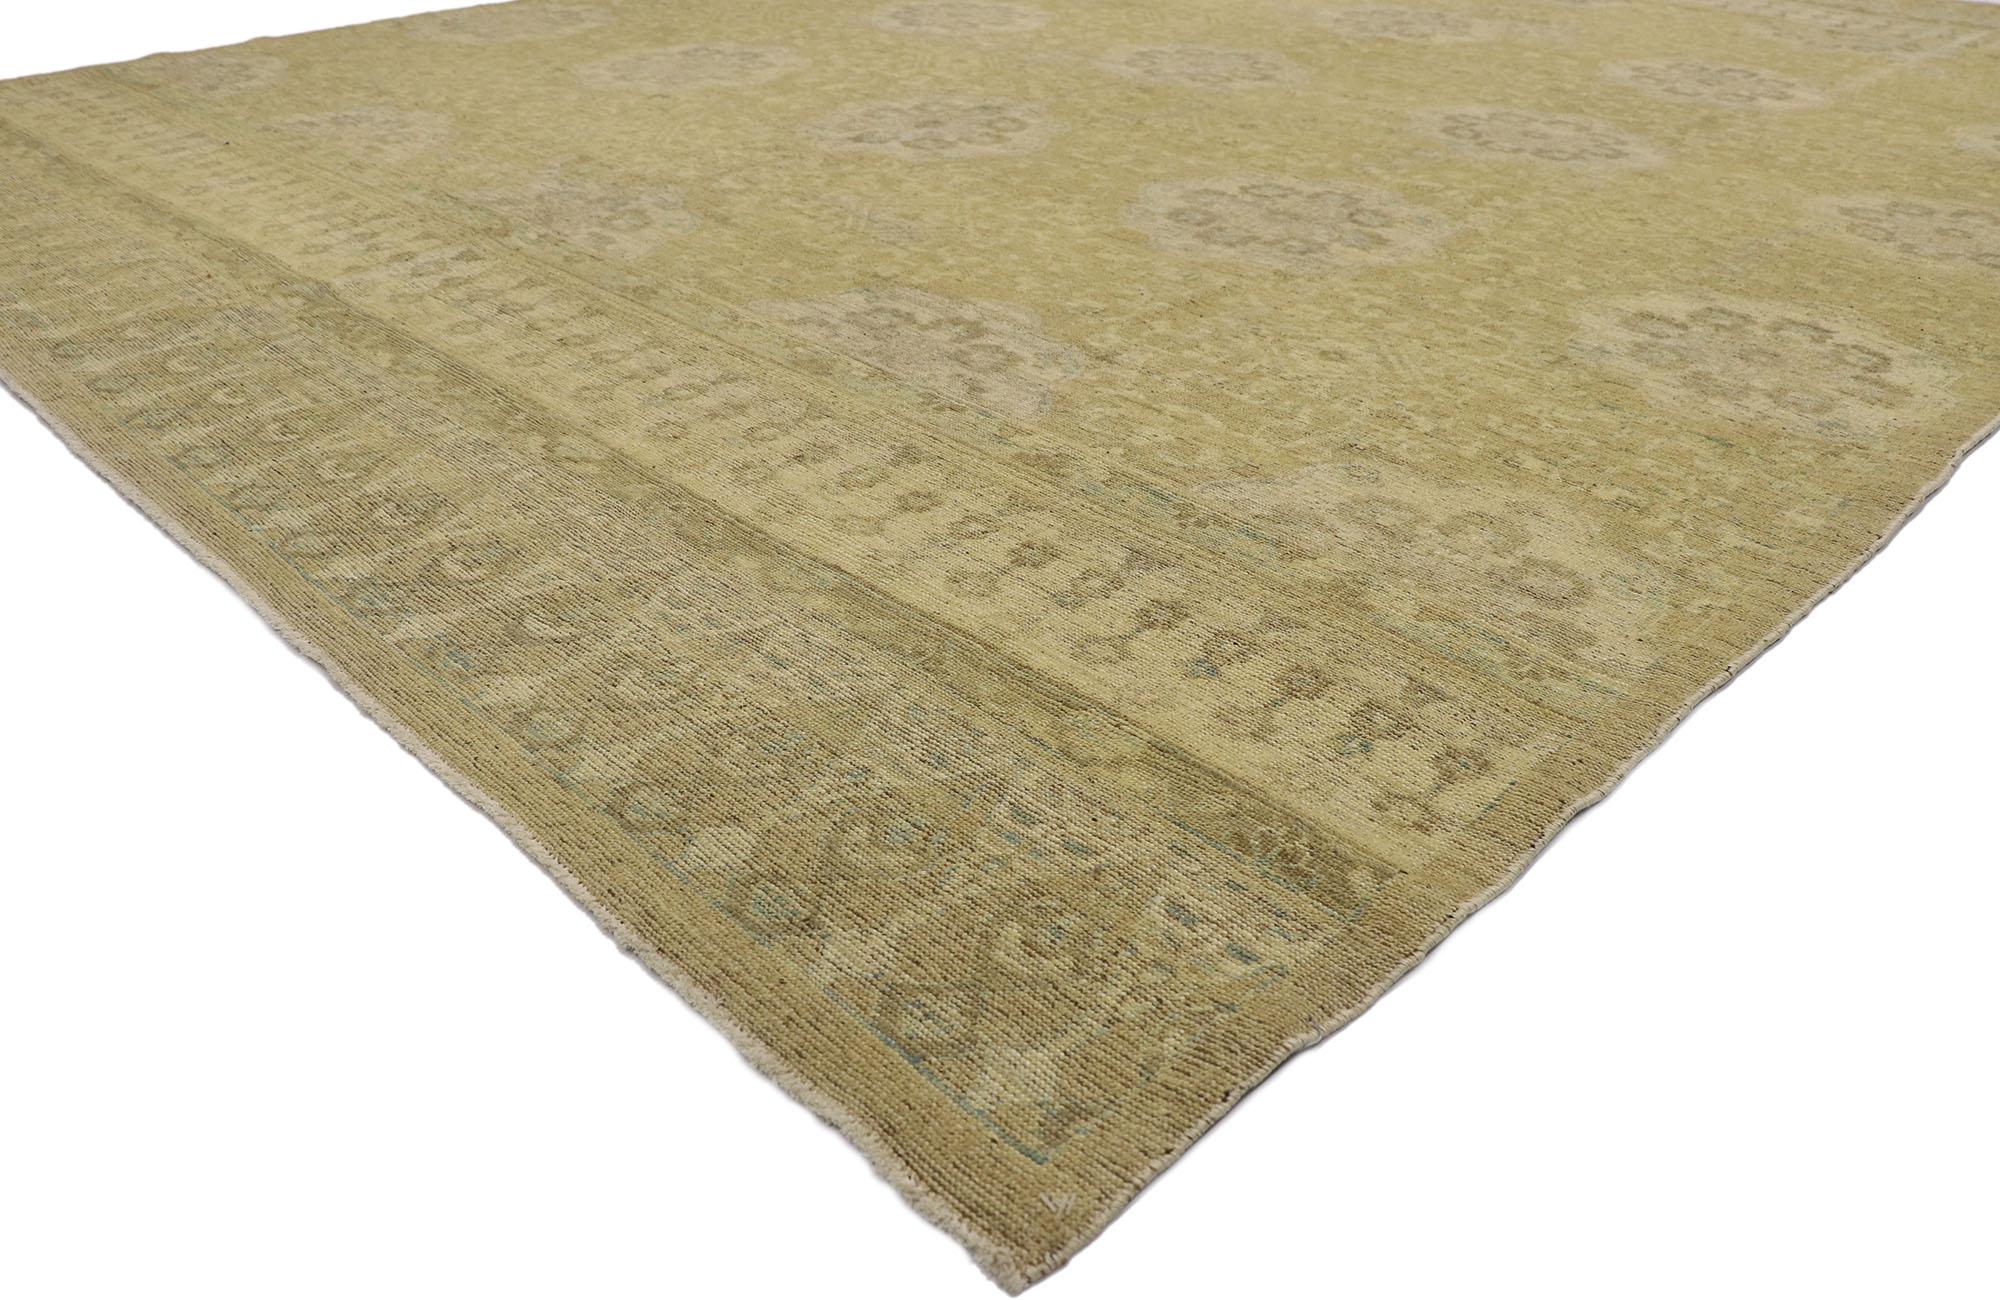 78153 vintage Khotan rug with European style 09'02 x 11'10. Cleverly composed with understated elegance in neutral colors, this hand knotted wool vintage Pakistani Khotan rug will take on a curated lived-in look that feels timeless while imparting a